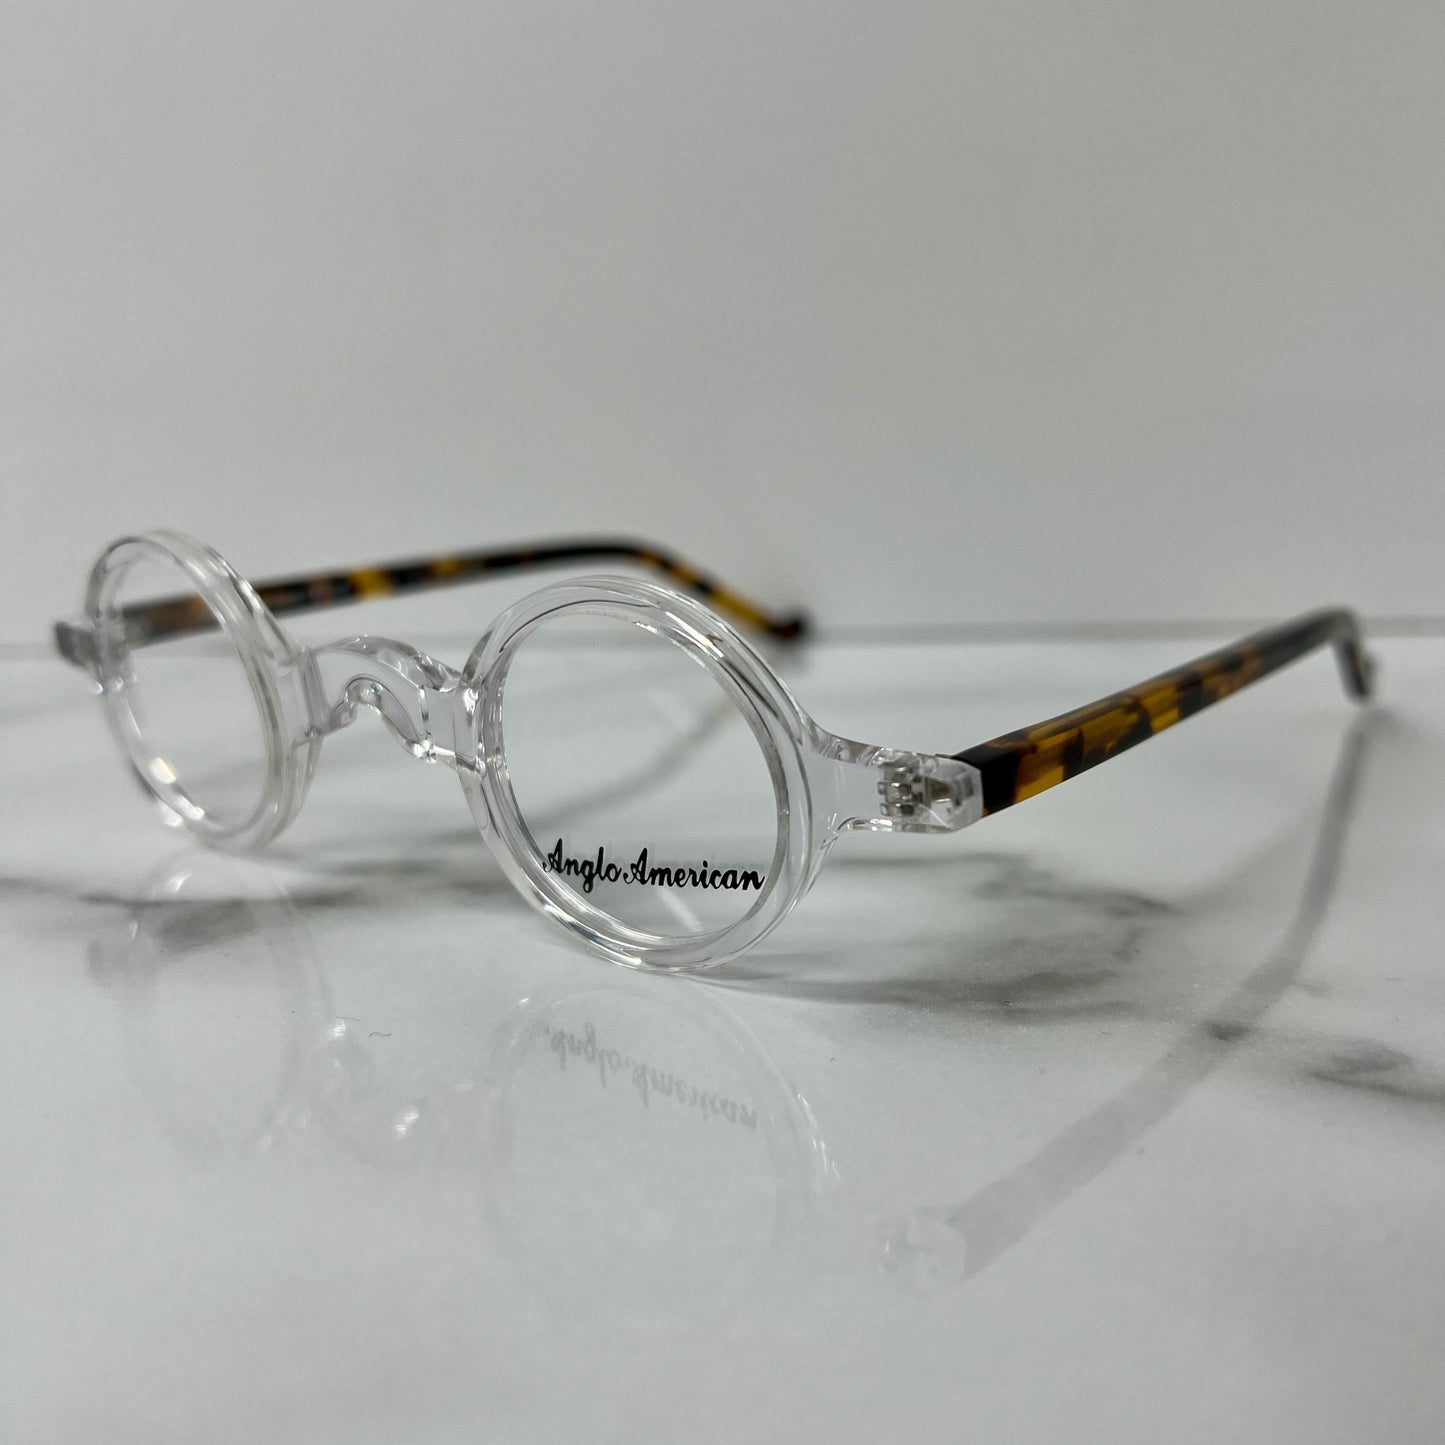 Anglo American Groucho Glasses Frames Clear Round London Eyewear.